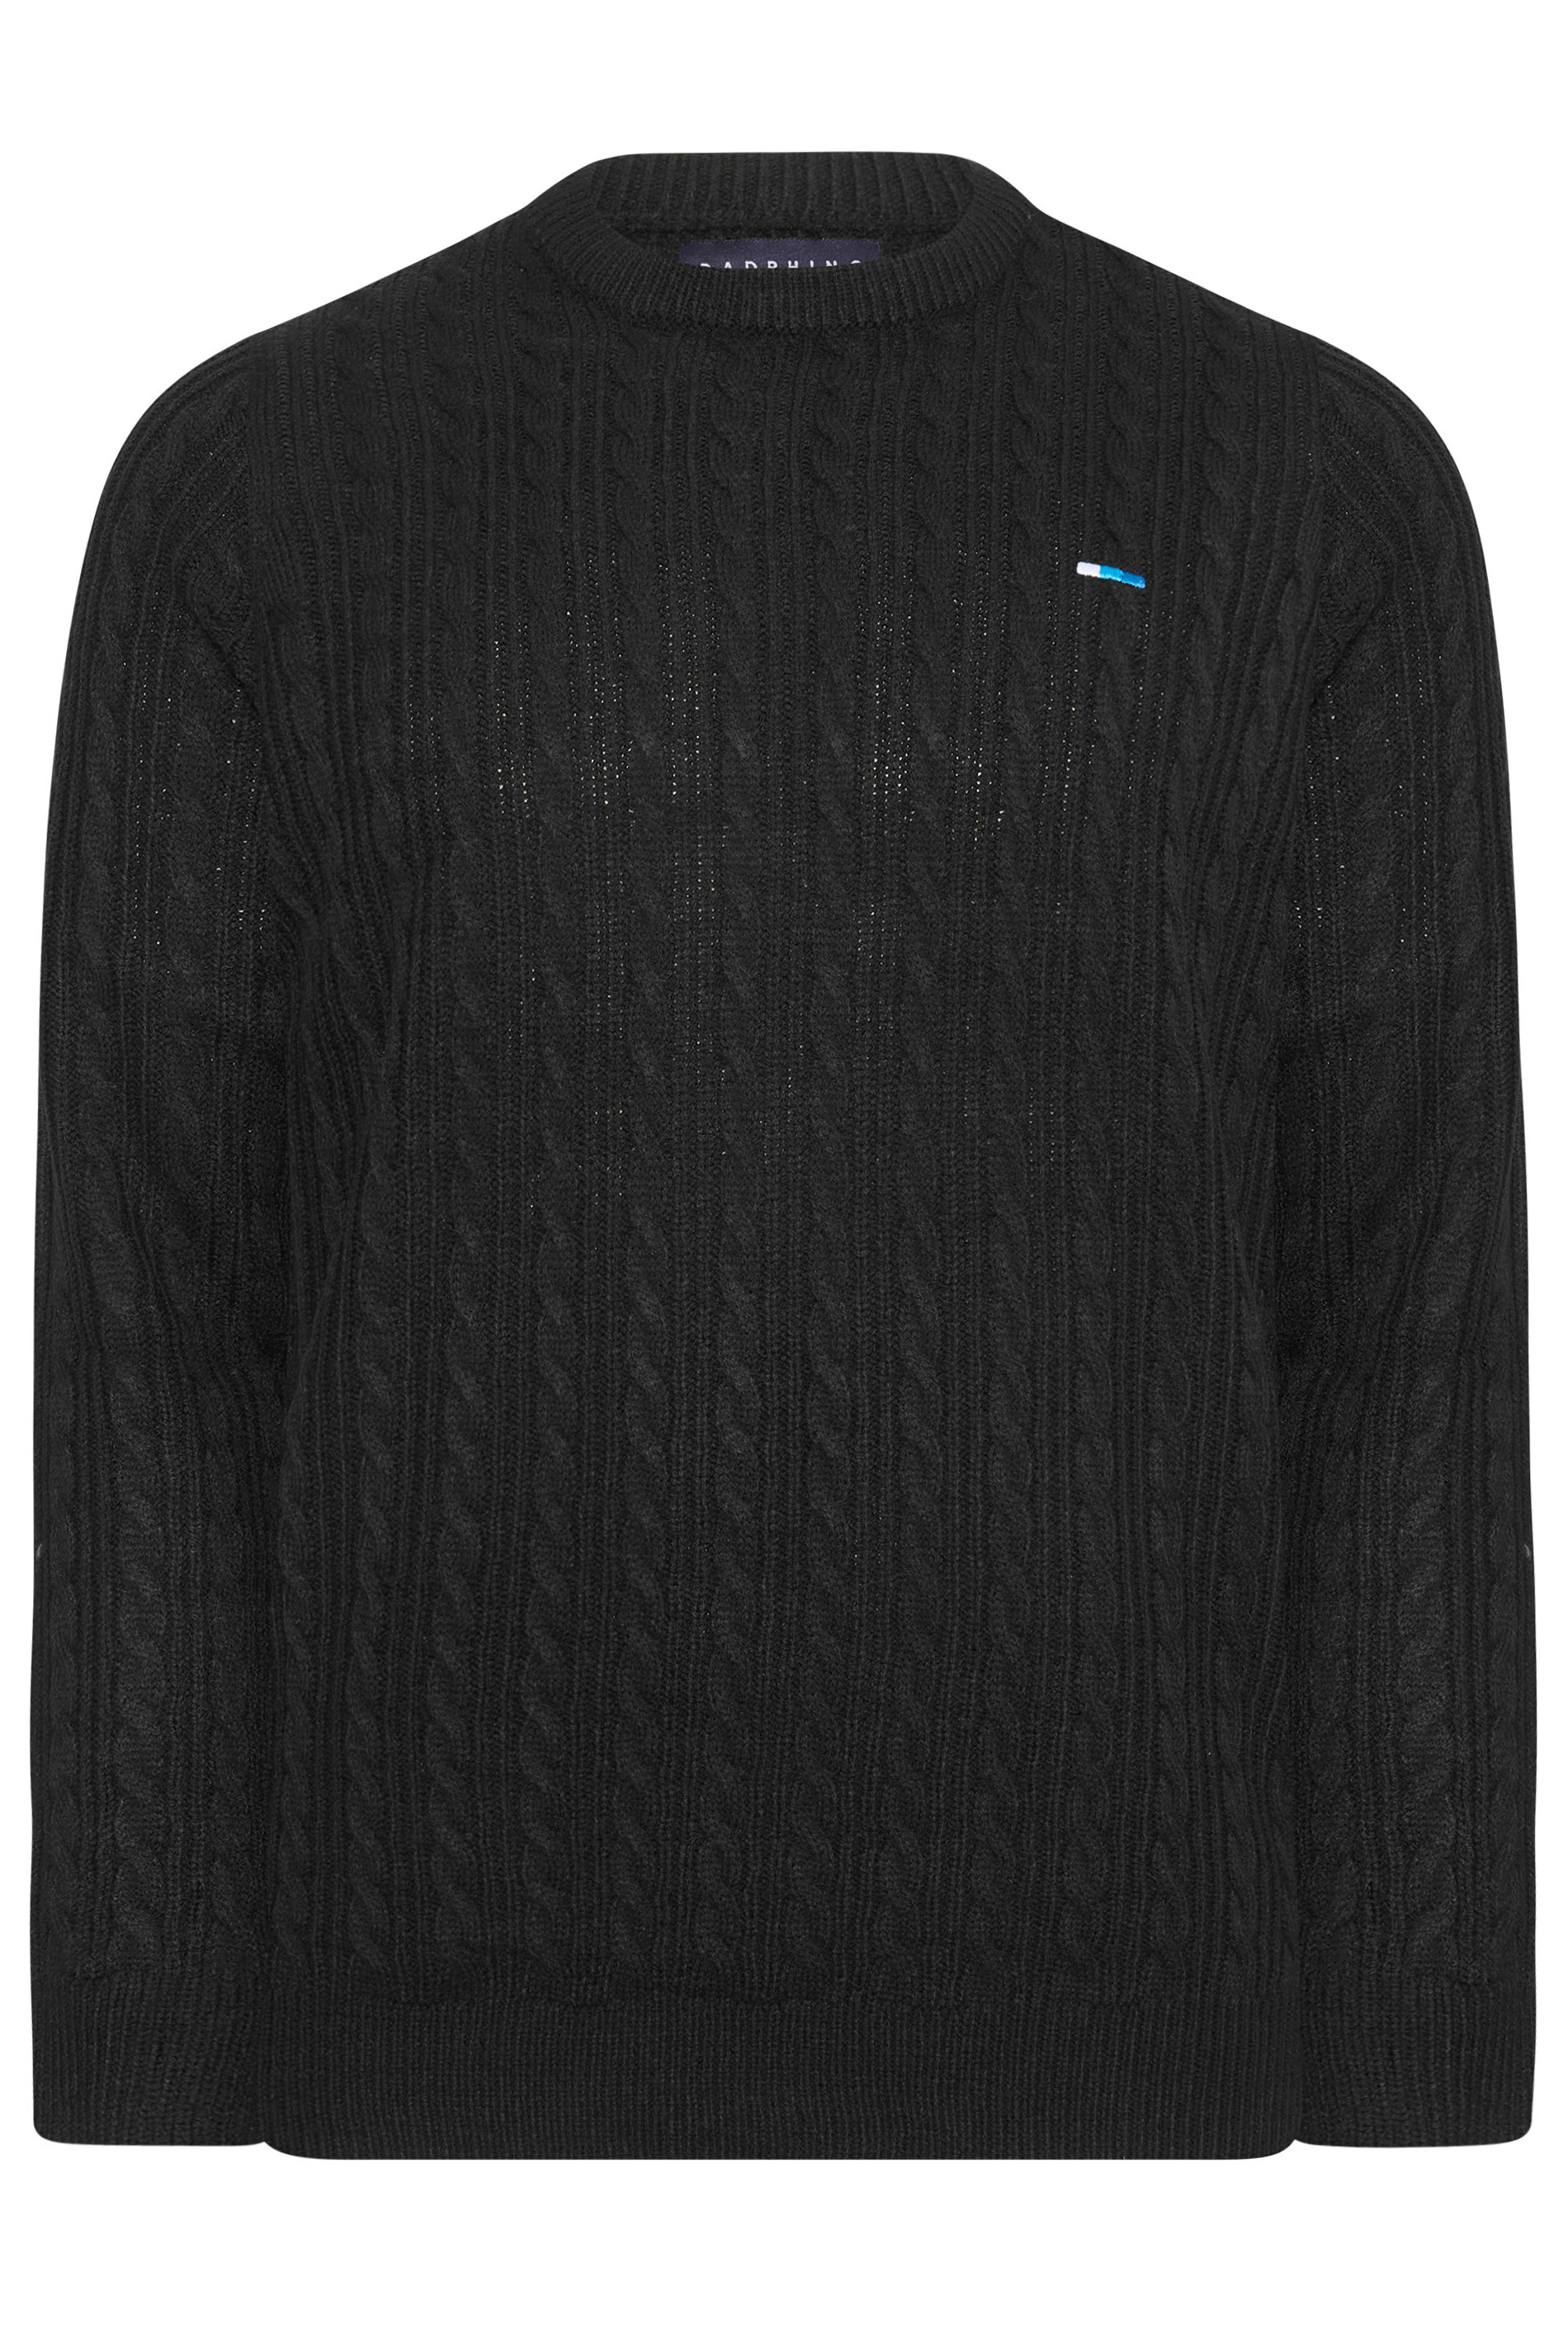 BadRhino Black Essential Cable Knitted Jumper | BadRhino